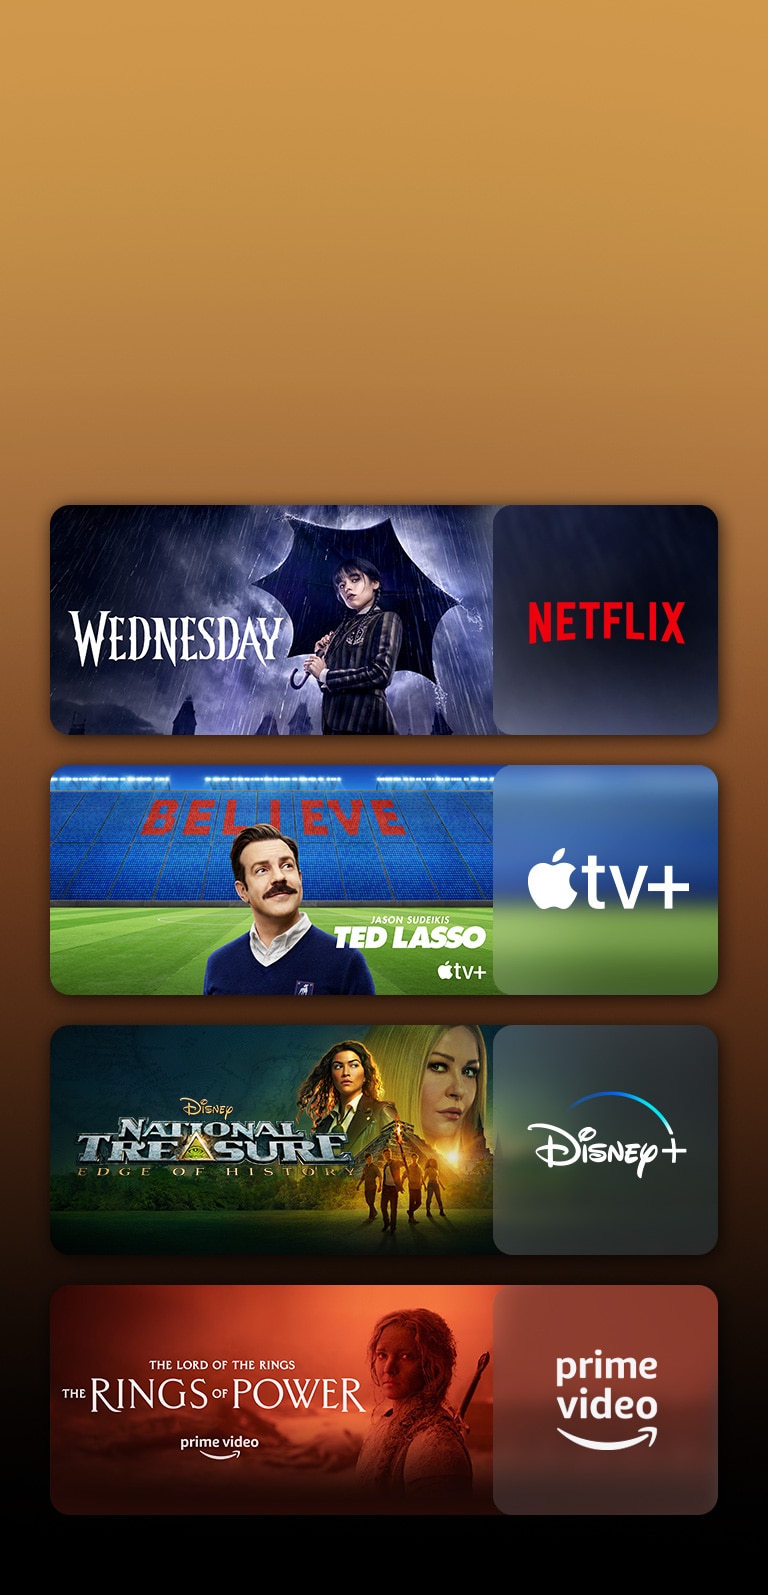 There are logos of streaming service platforms and matching footages right next to each logo. There are images of Netflix's Wednesday, Apple TV's TED LASSO, Disney Plus's National Treasure and PRIME VIDEO's The rings of power.